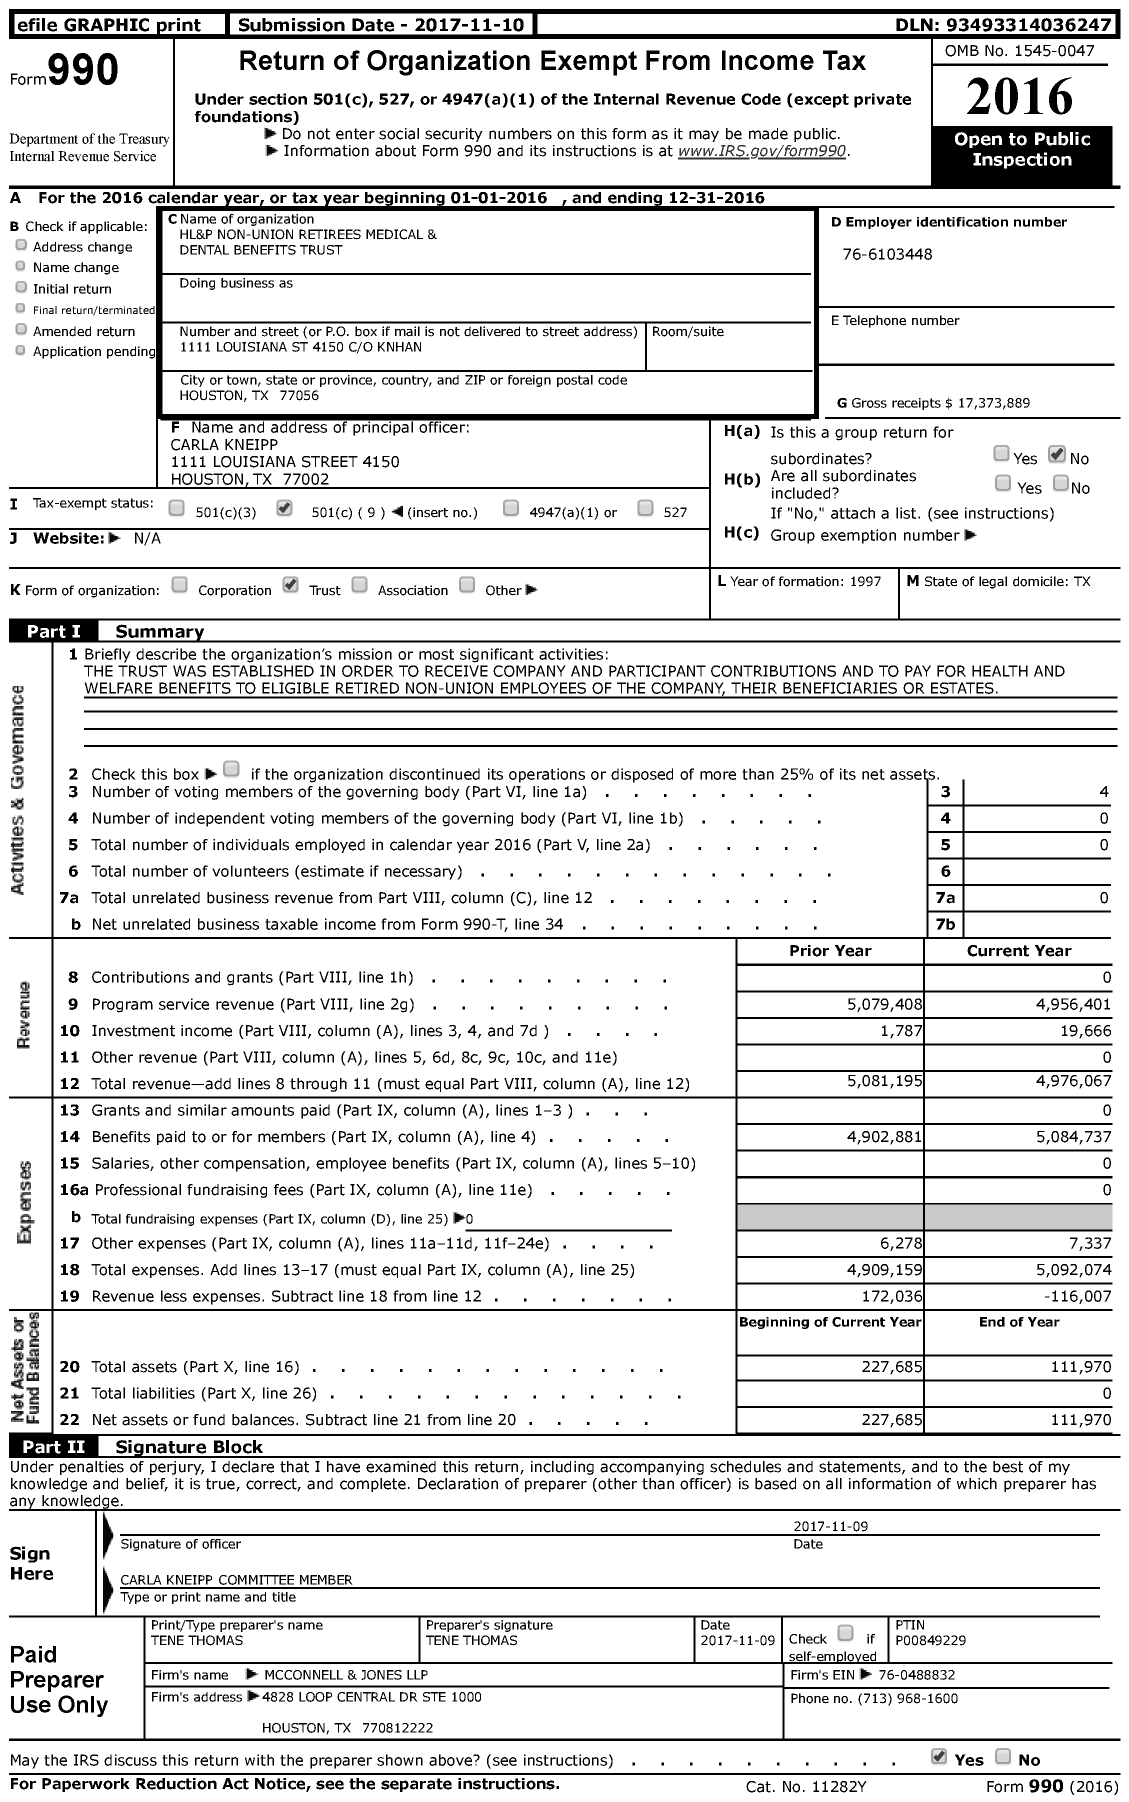 Image of first page of 2016 Form 990 for HL&P Non-Union Retirees Medical and Dental Benefits Trust